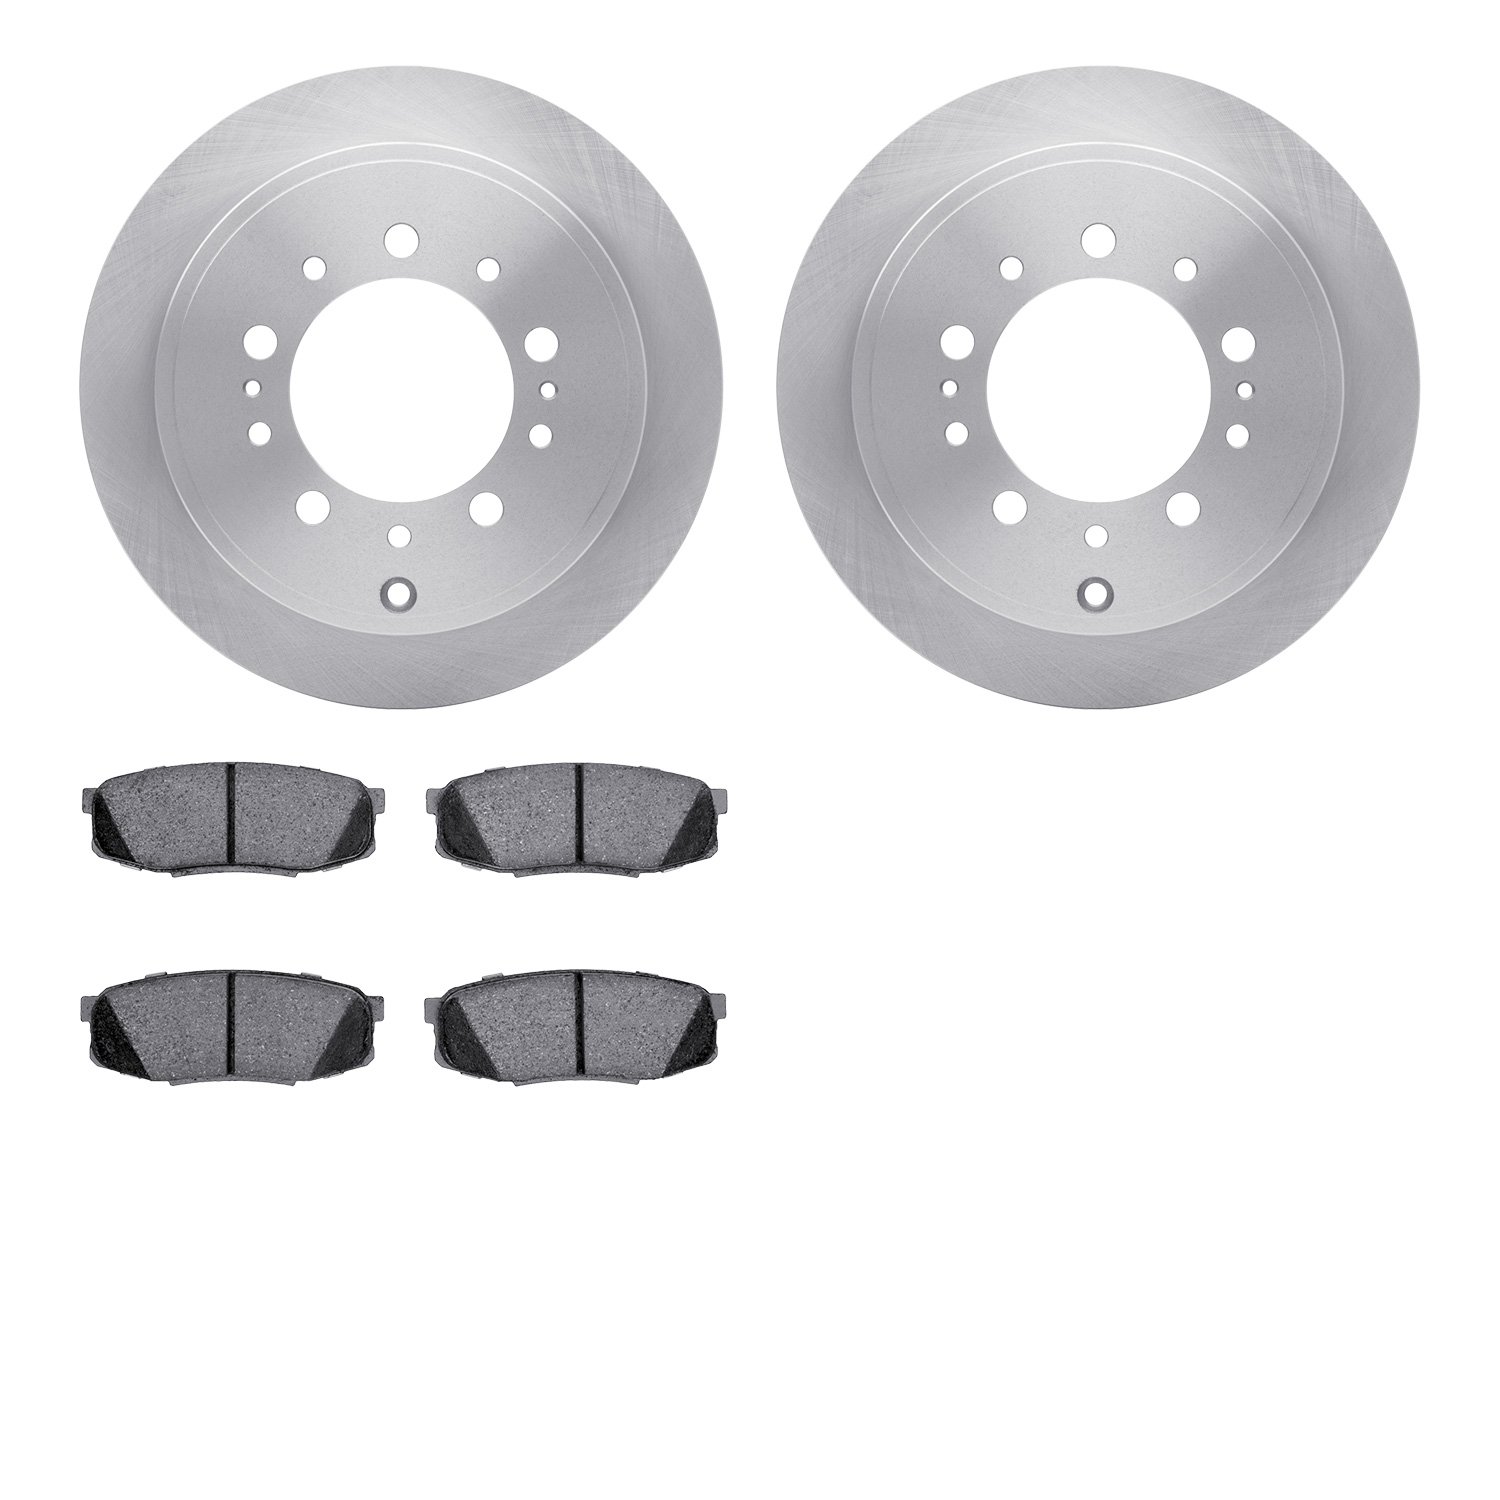 6402-76061 Brake Rotors with Ultimate-Duty Brake Pads, Fits Select Lexus/Toyota/Scion, Position: Rear